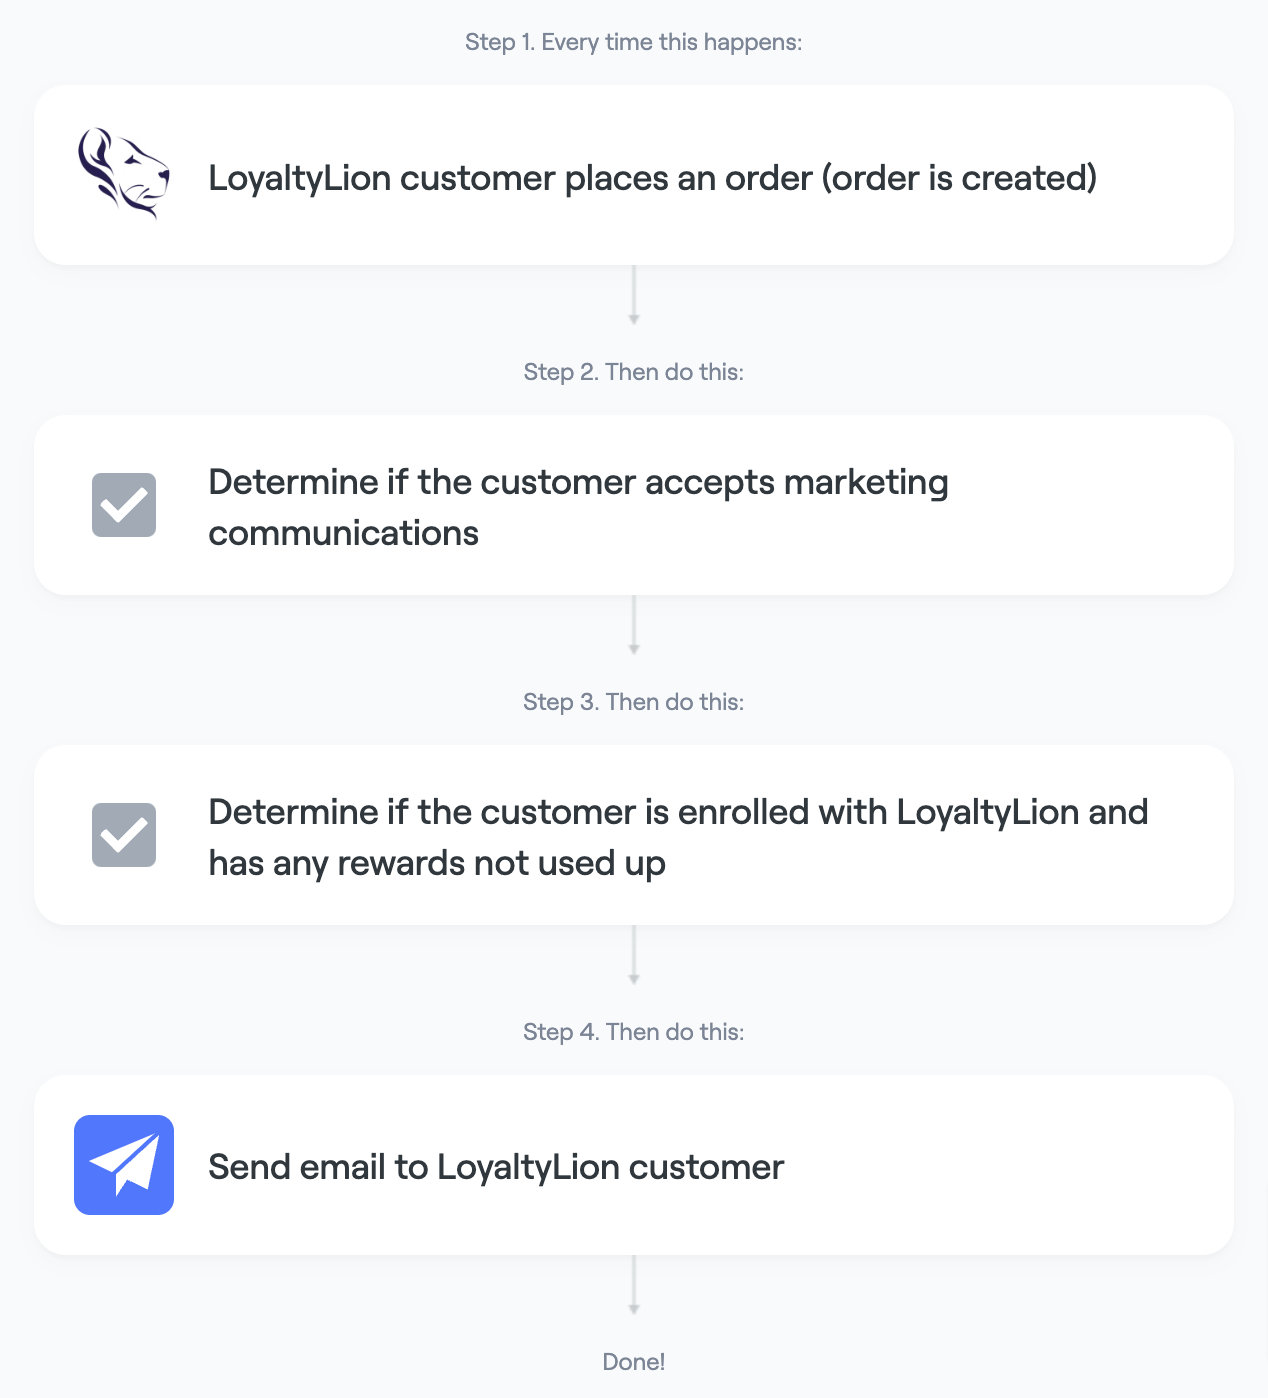 Email a customer if LoyaltyLion rewards have not been used